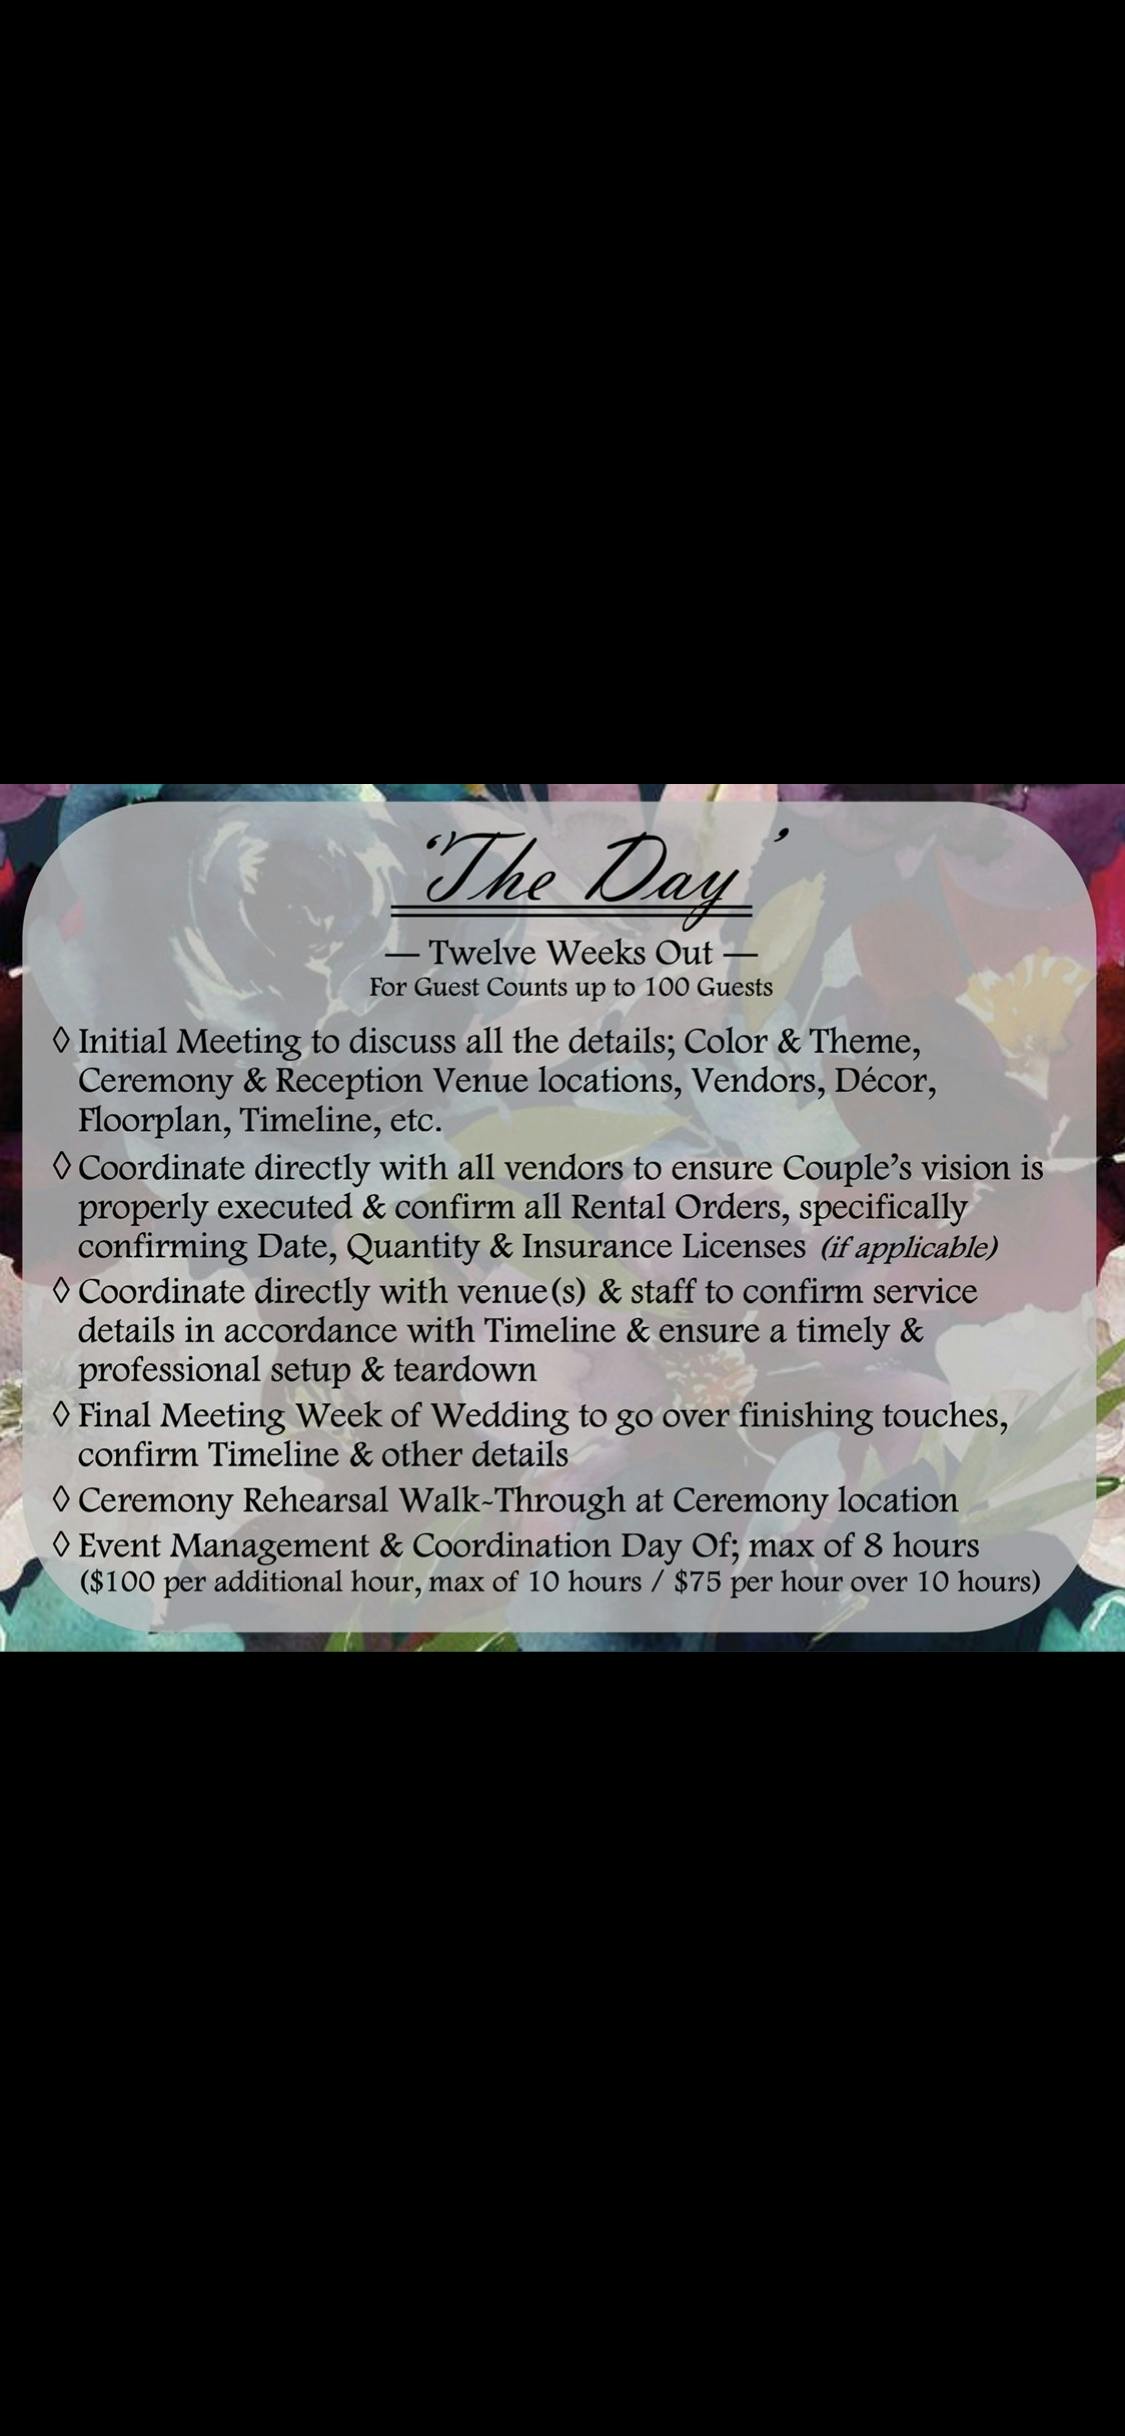 ‘The Day’ Wedding Planning Package